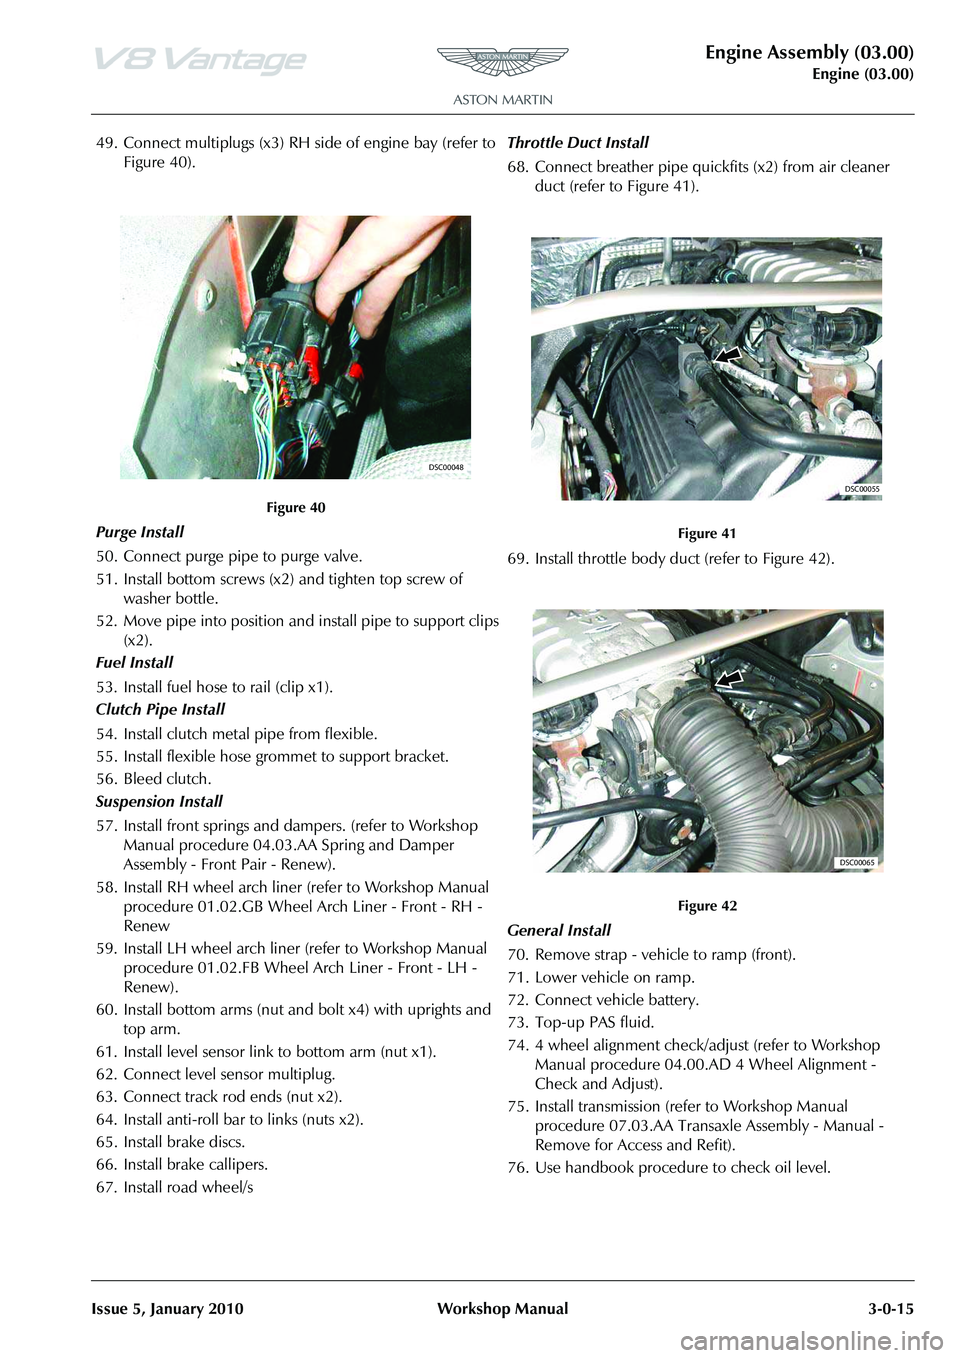 ASTON MARTIN V8 VANTAGE 2010  Workshop Manual Engine Assembly (03.00)
Engine (03.00)
Issue 5, January 2010 Workshop Manual 3-0-15
49. Connect multiplugs (x3) RH side of engine bay (refer to  Figure 40).
Purge Install
50. Connect purge pipe to pur